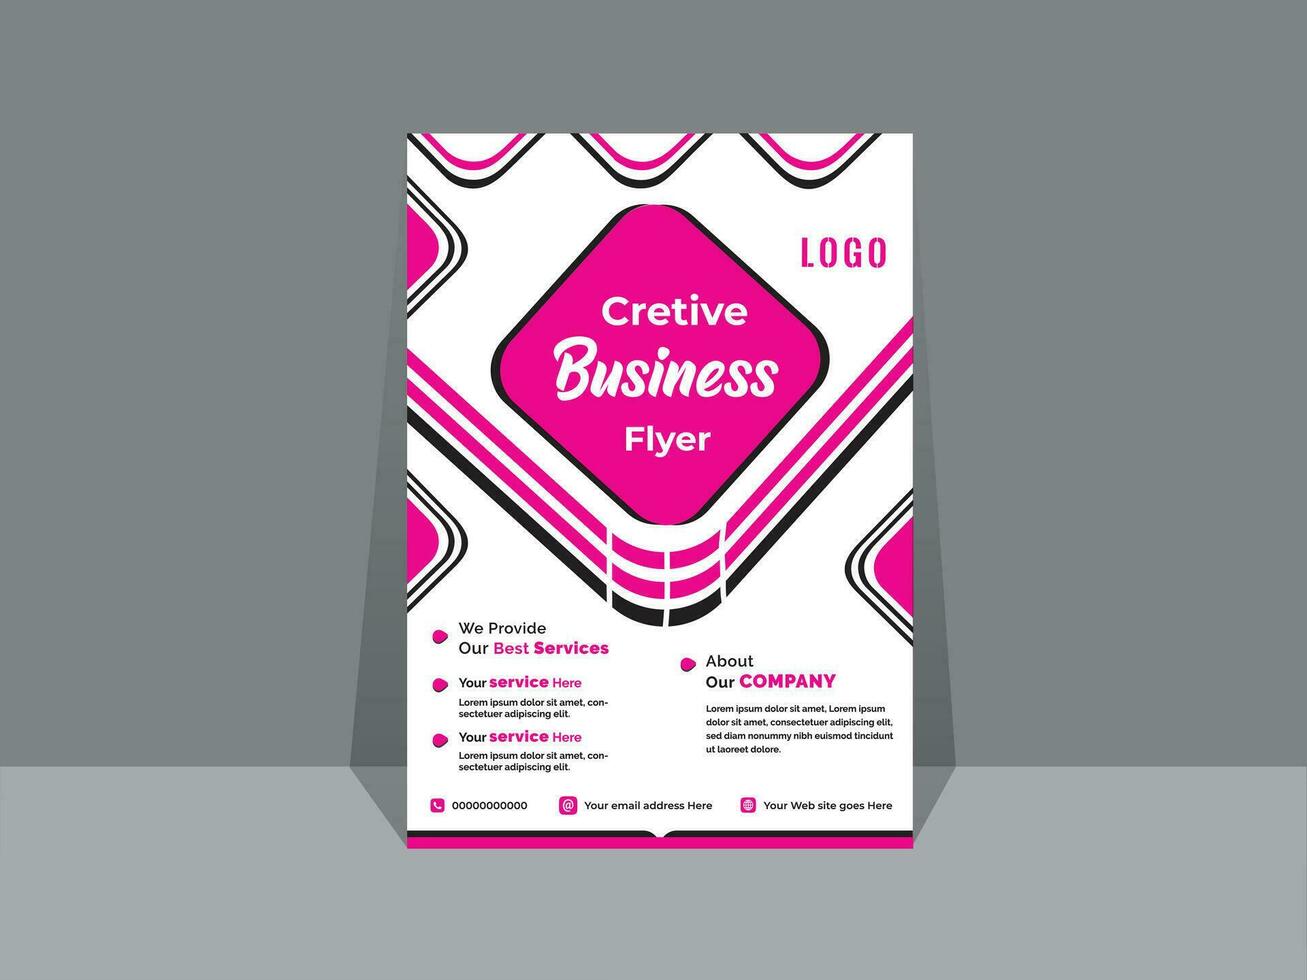 Creative Business flyer template design for a digital marketing company or agency vector